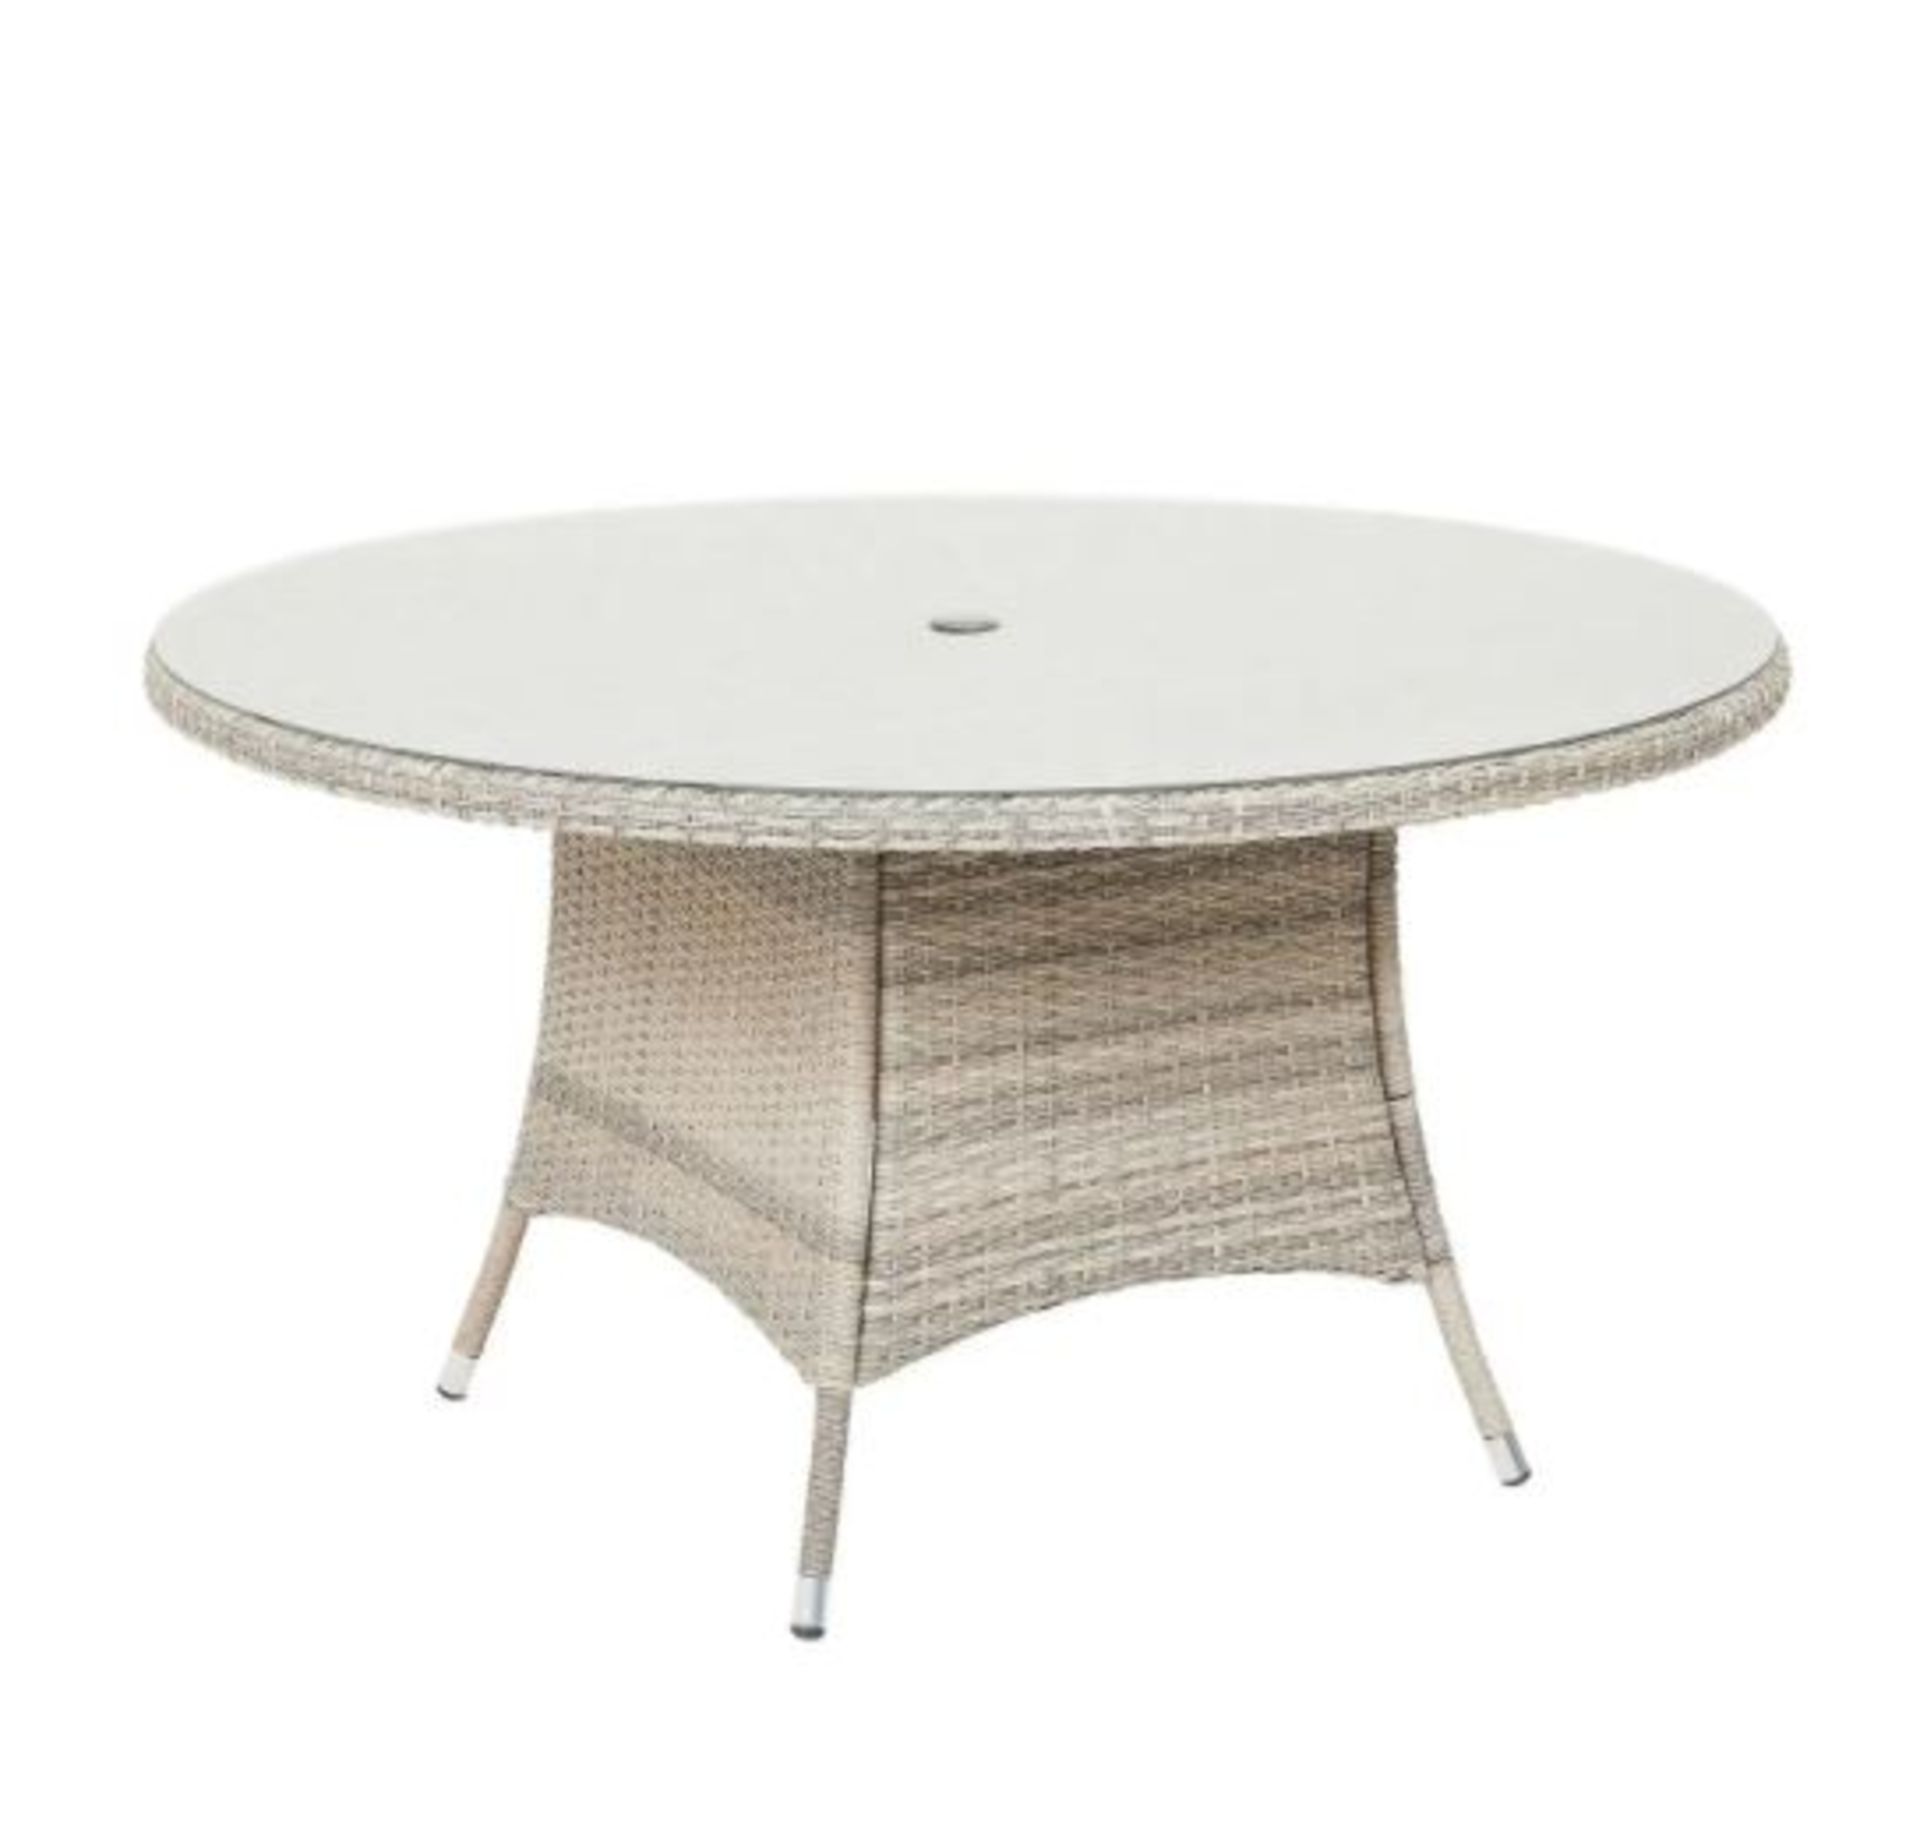 (R7N) 1x Hartington Florence 6 Seater Rattan Table Round With Legs And Side Panels (No Fixings, No